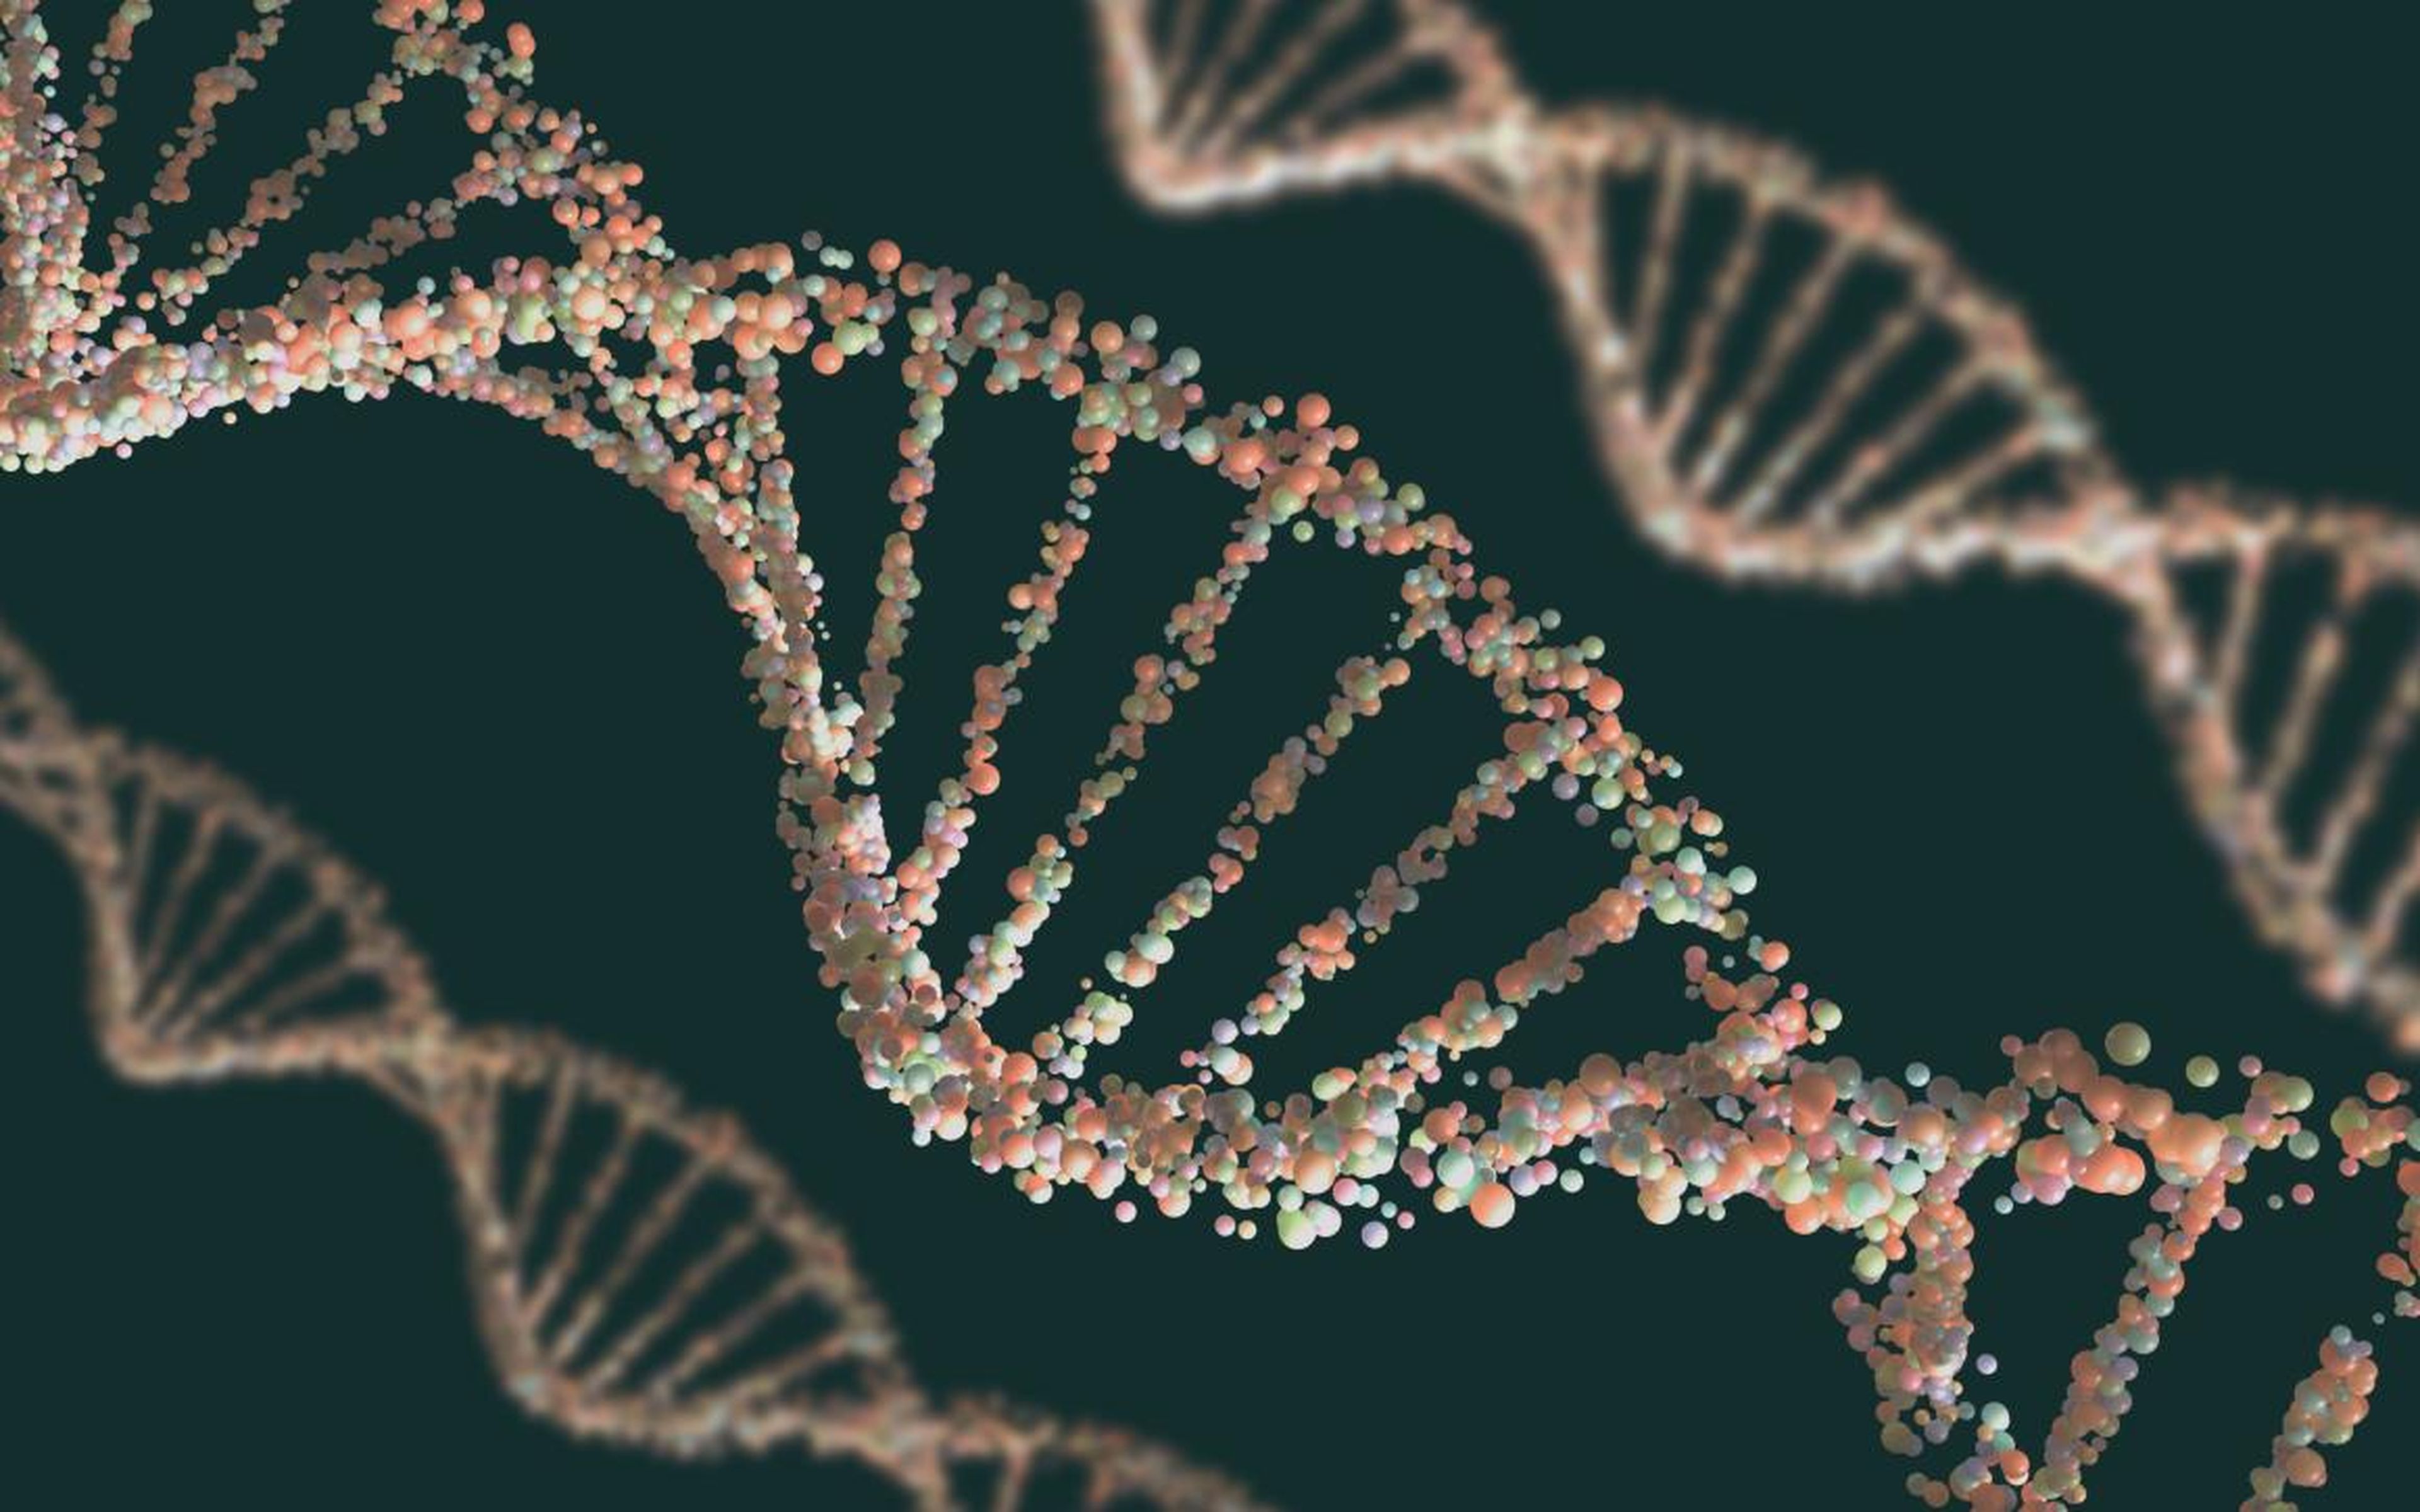 The FDA also approved a new drug that targets cancers based on DNA instead of tumor location.